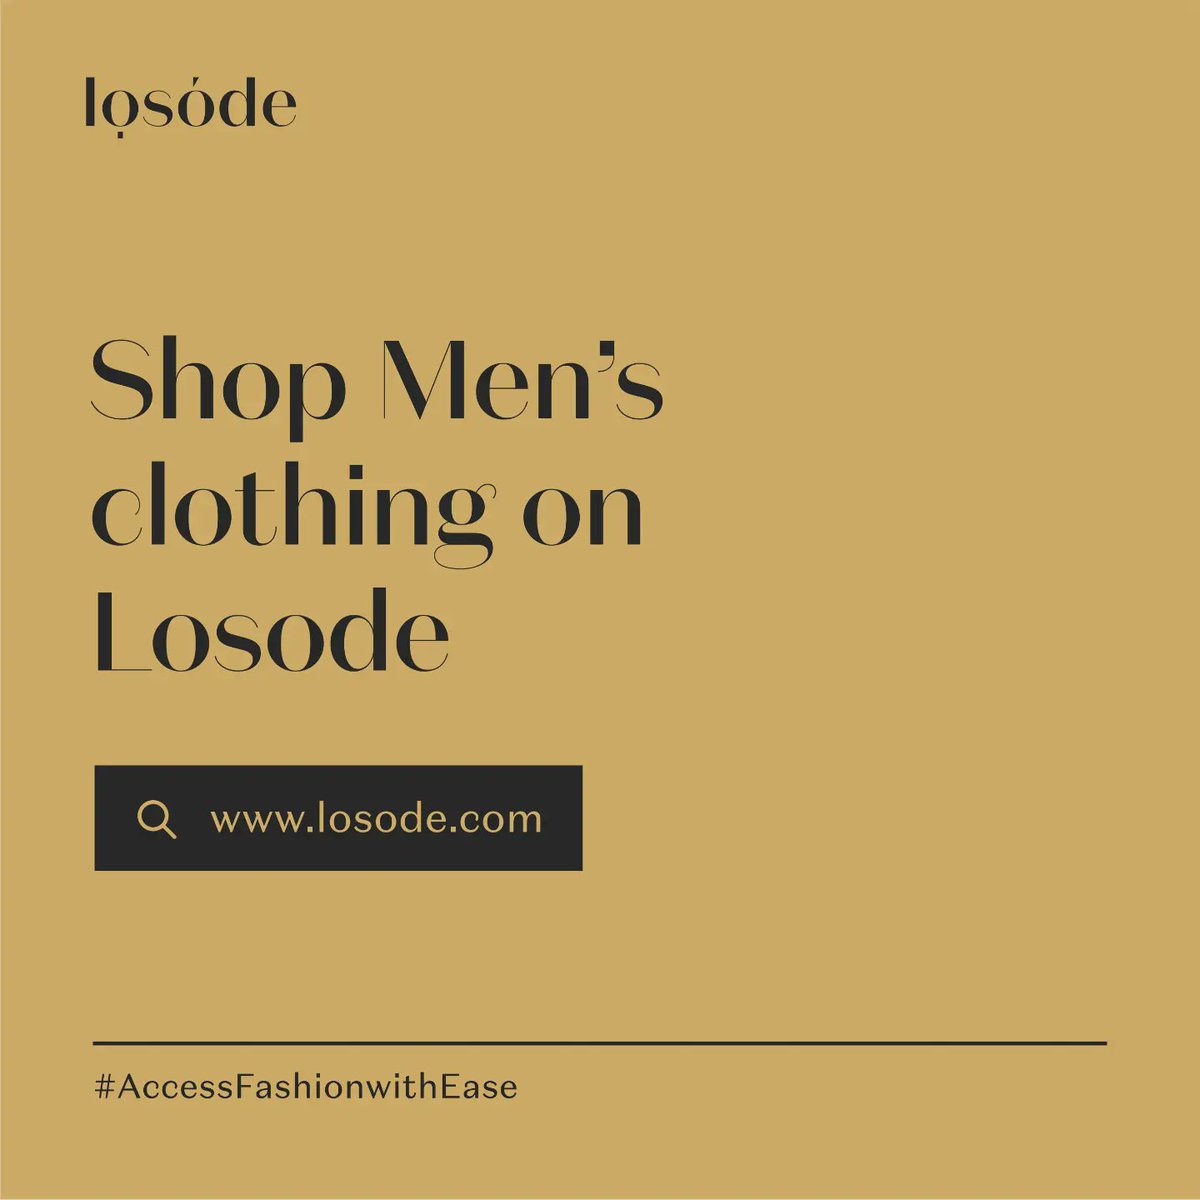 The men are not left out on Losode. Need a confidence boost? Shop unique brands.

#fashion #blackownedbusiness #fashionstyle #menfashion
#losode #Africanfashion #menwithstyle #fashionAfrica #fashionbusiness